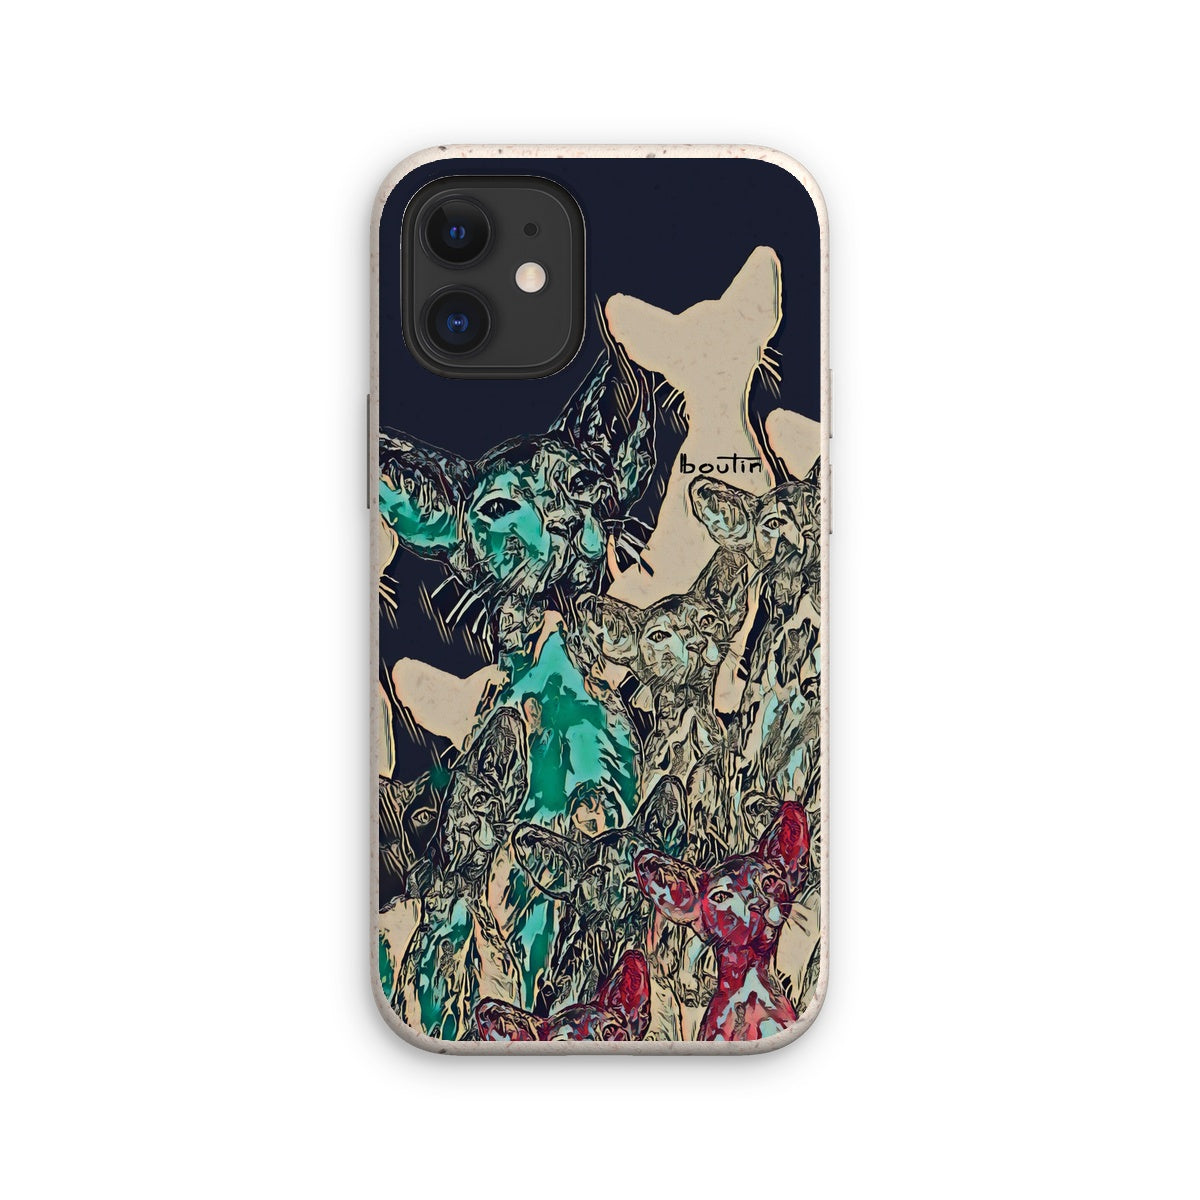 Les Cleopatre marine eco-friendly cell phone case